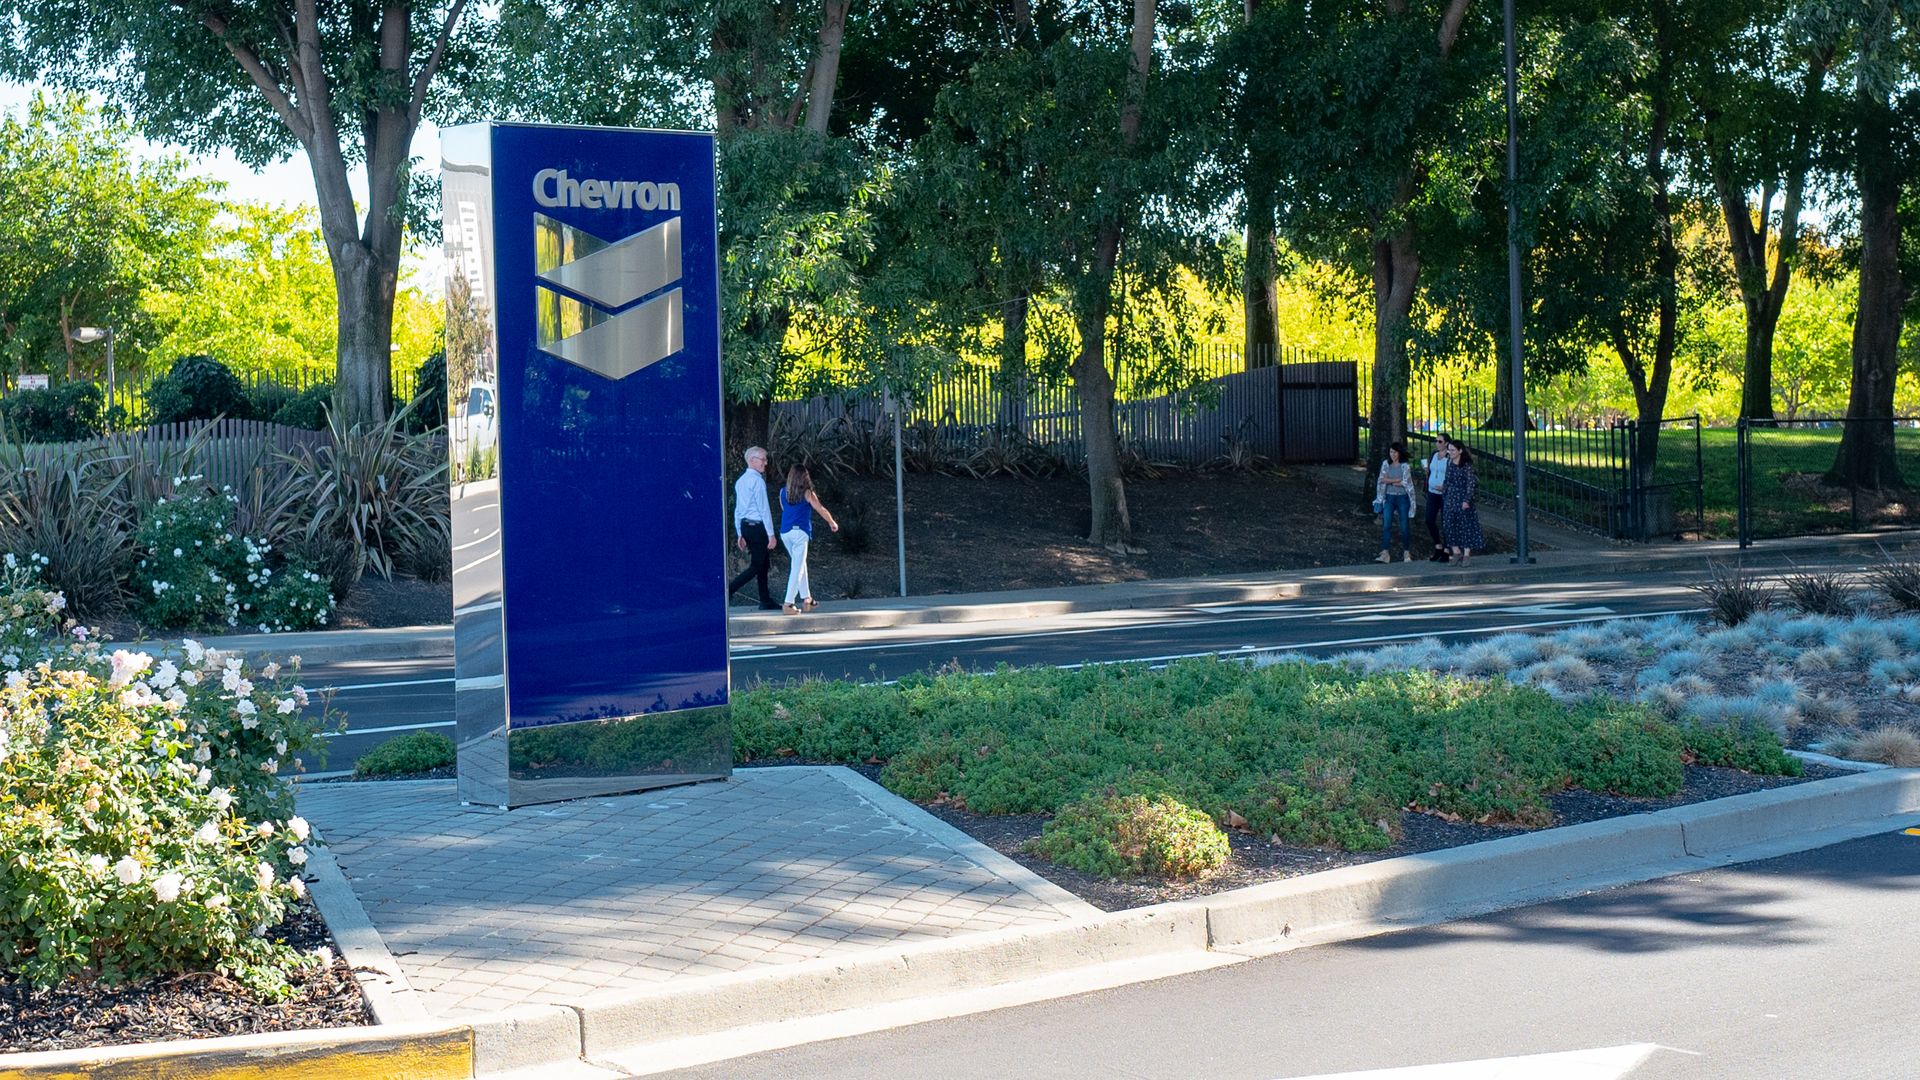 A sign at the entrance to Chevron's global headquarters in San Ramon, California